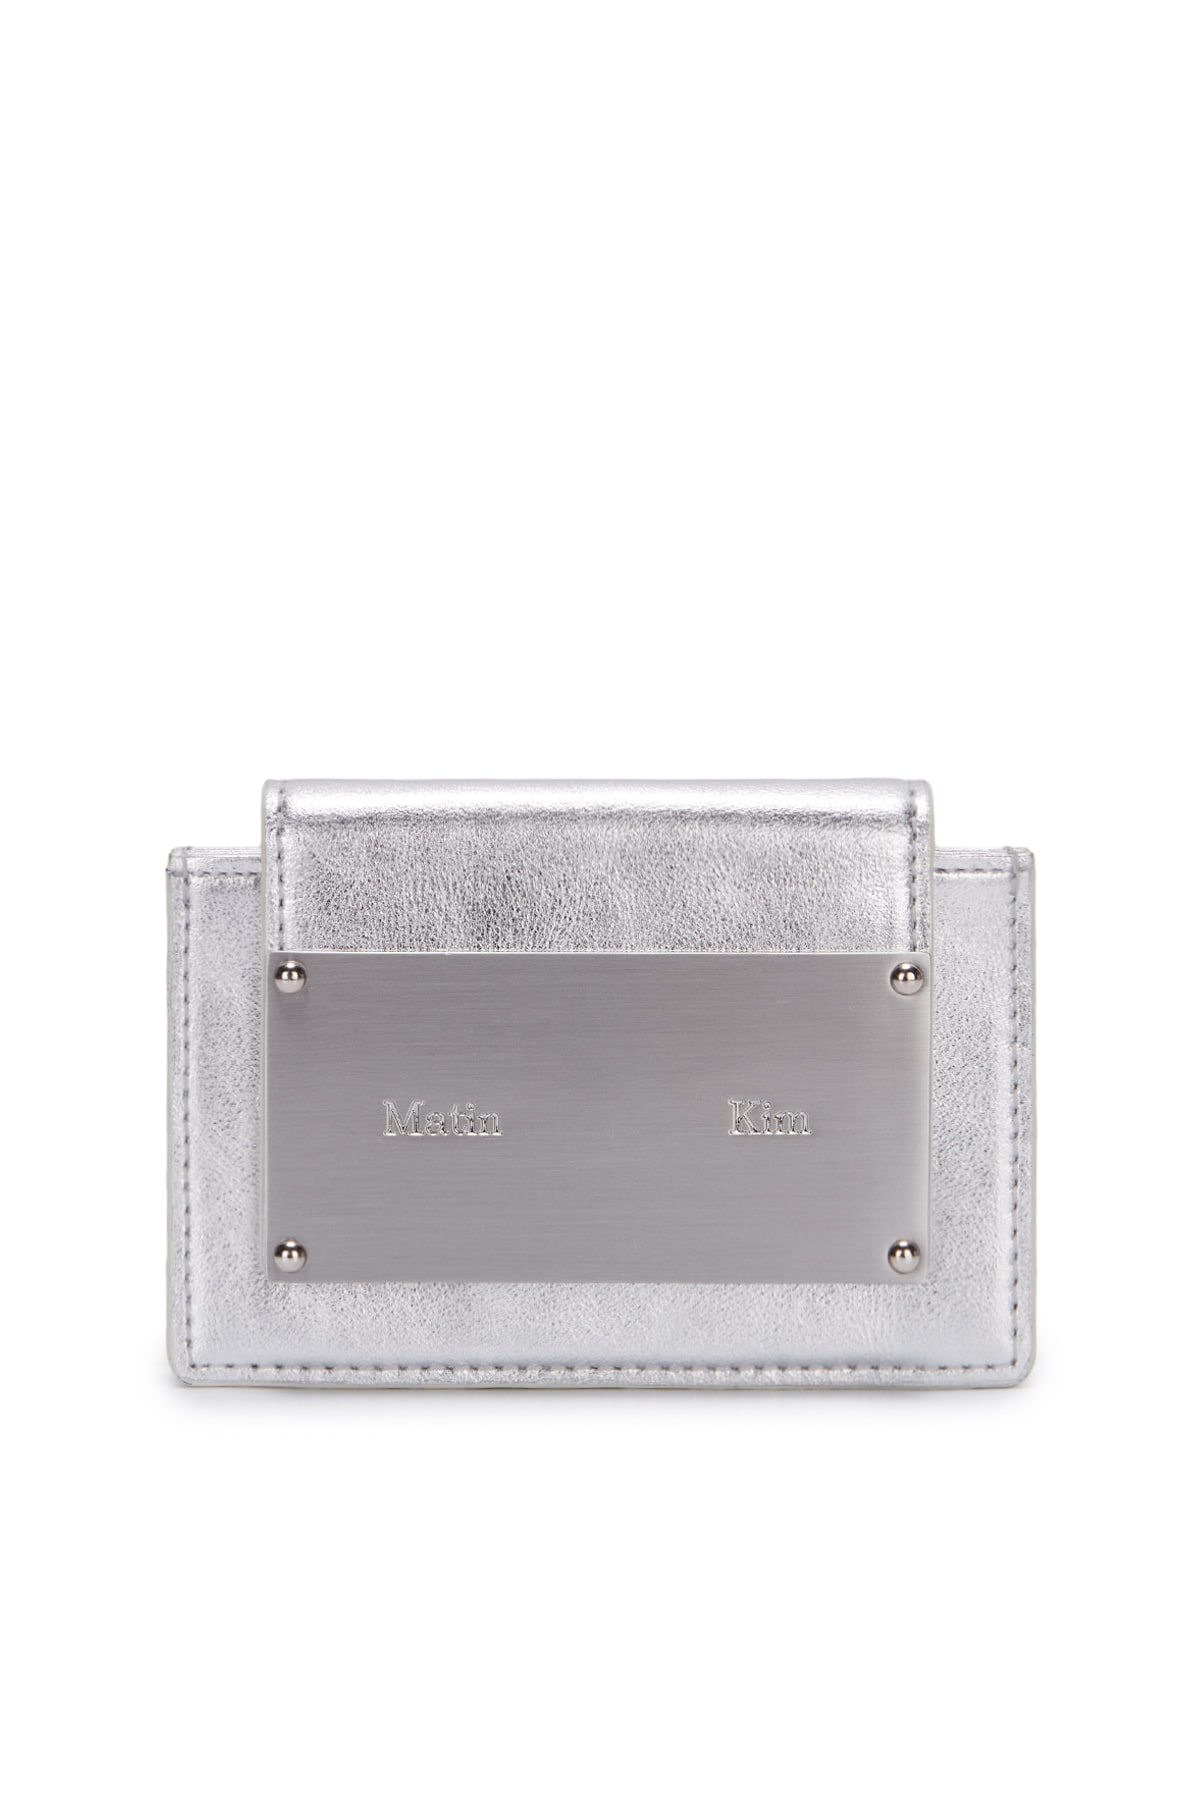 ACCORDION WALLET IN SILVER - MATINKIM